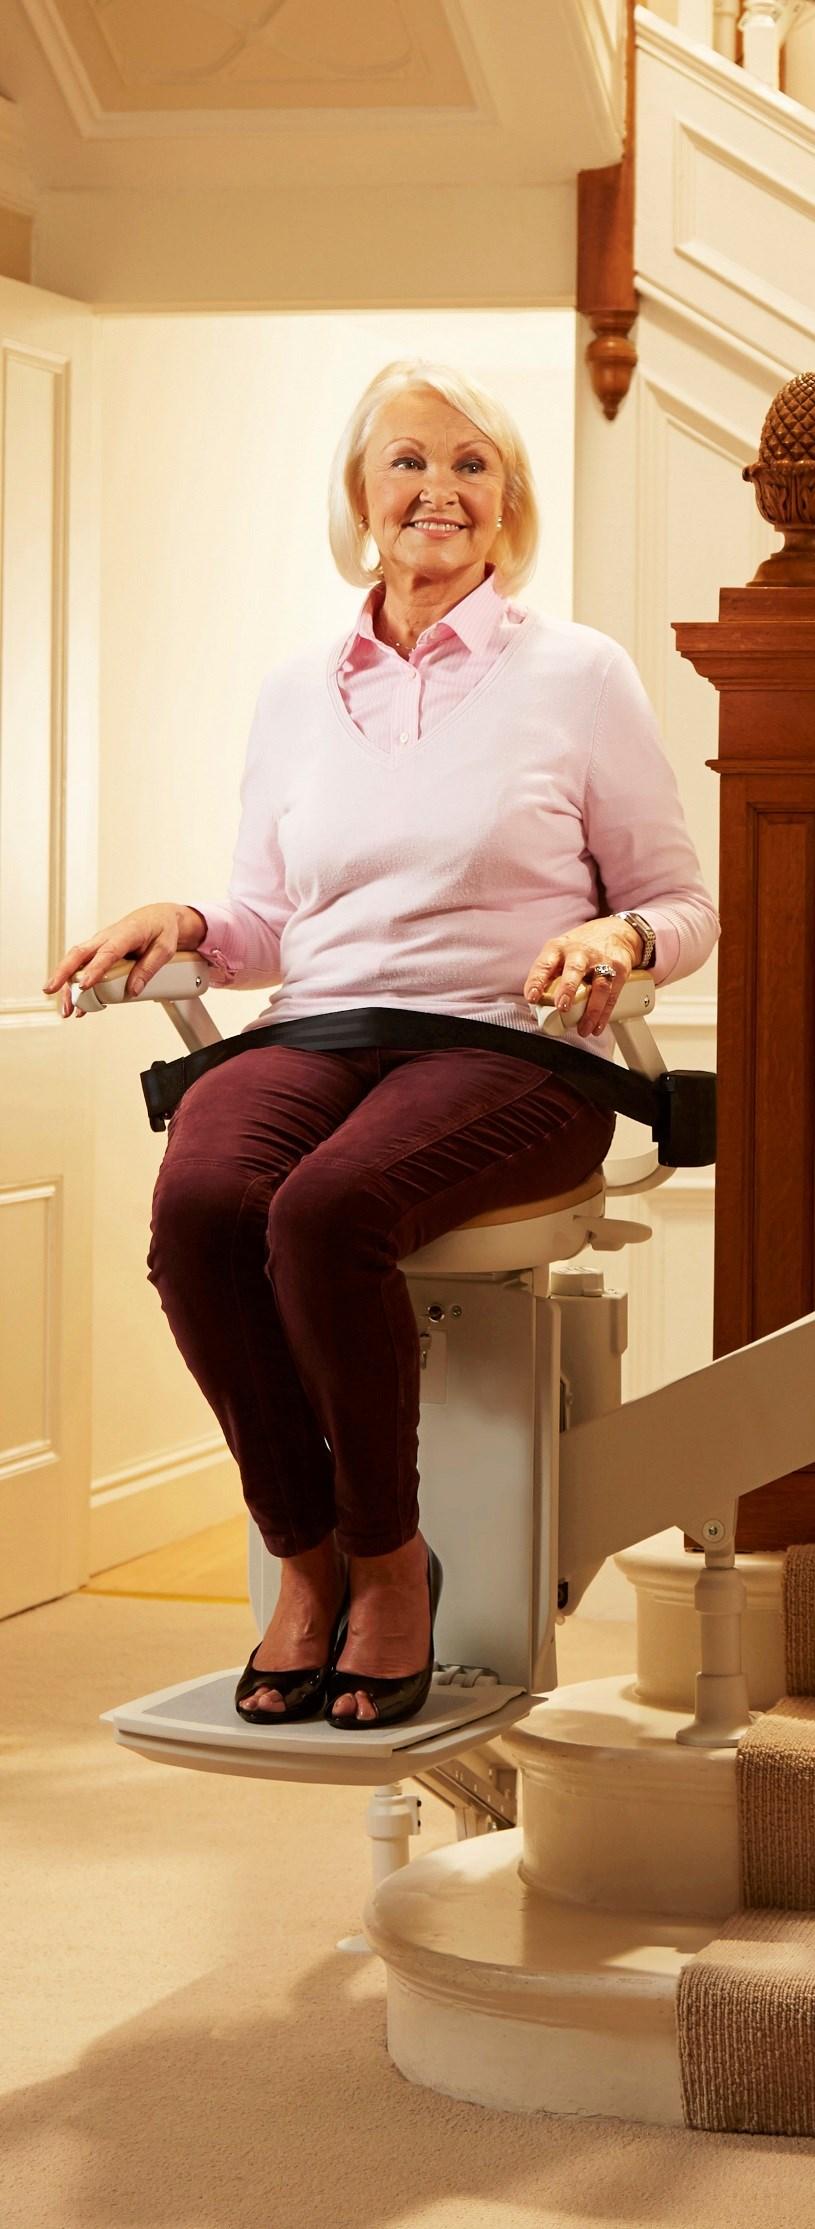 Stairlift Comparison - Buyer s Guide Other important things to consider If your mobility is likely to